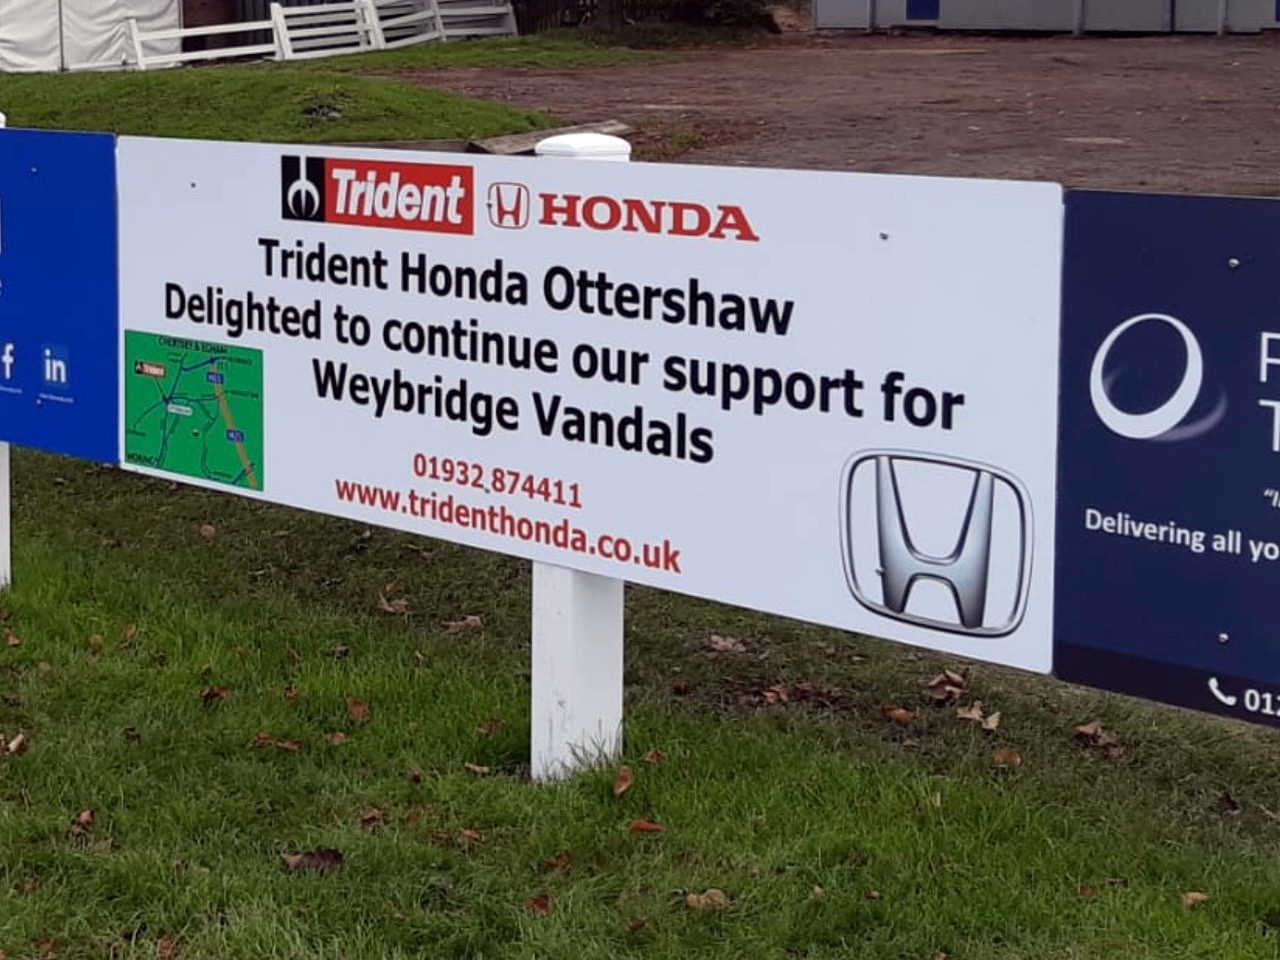 Trident Honda extends sponsorship of Weybridge Vandals to include a large pitch-side banner